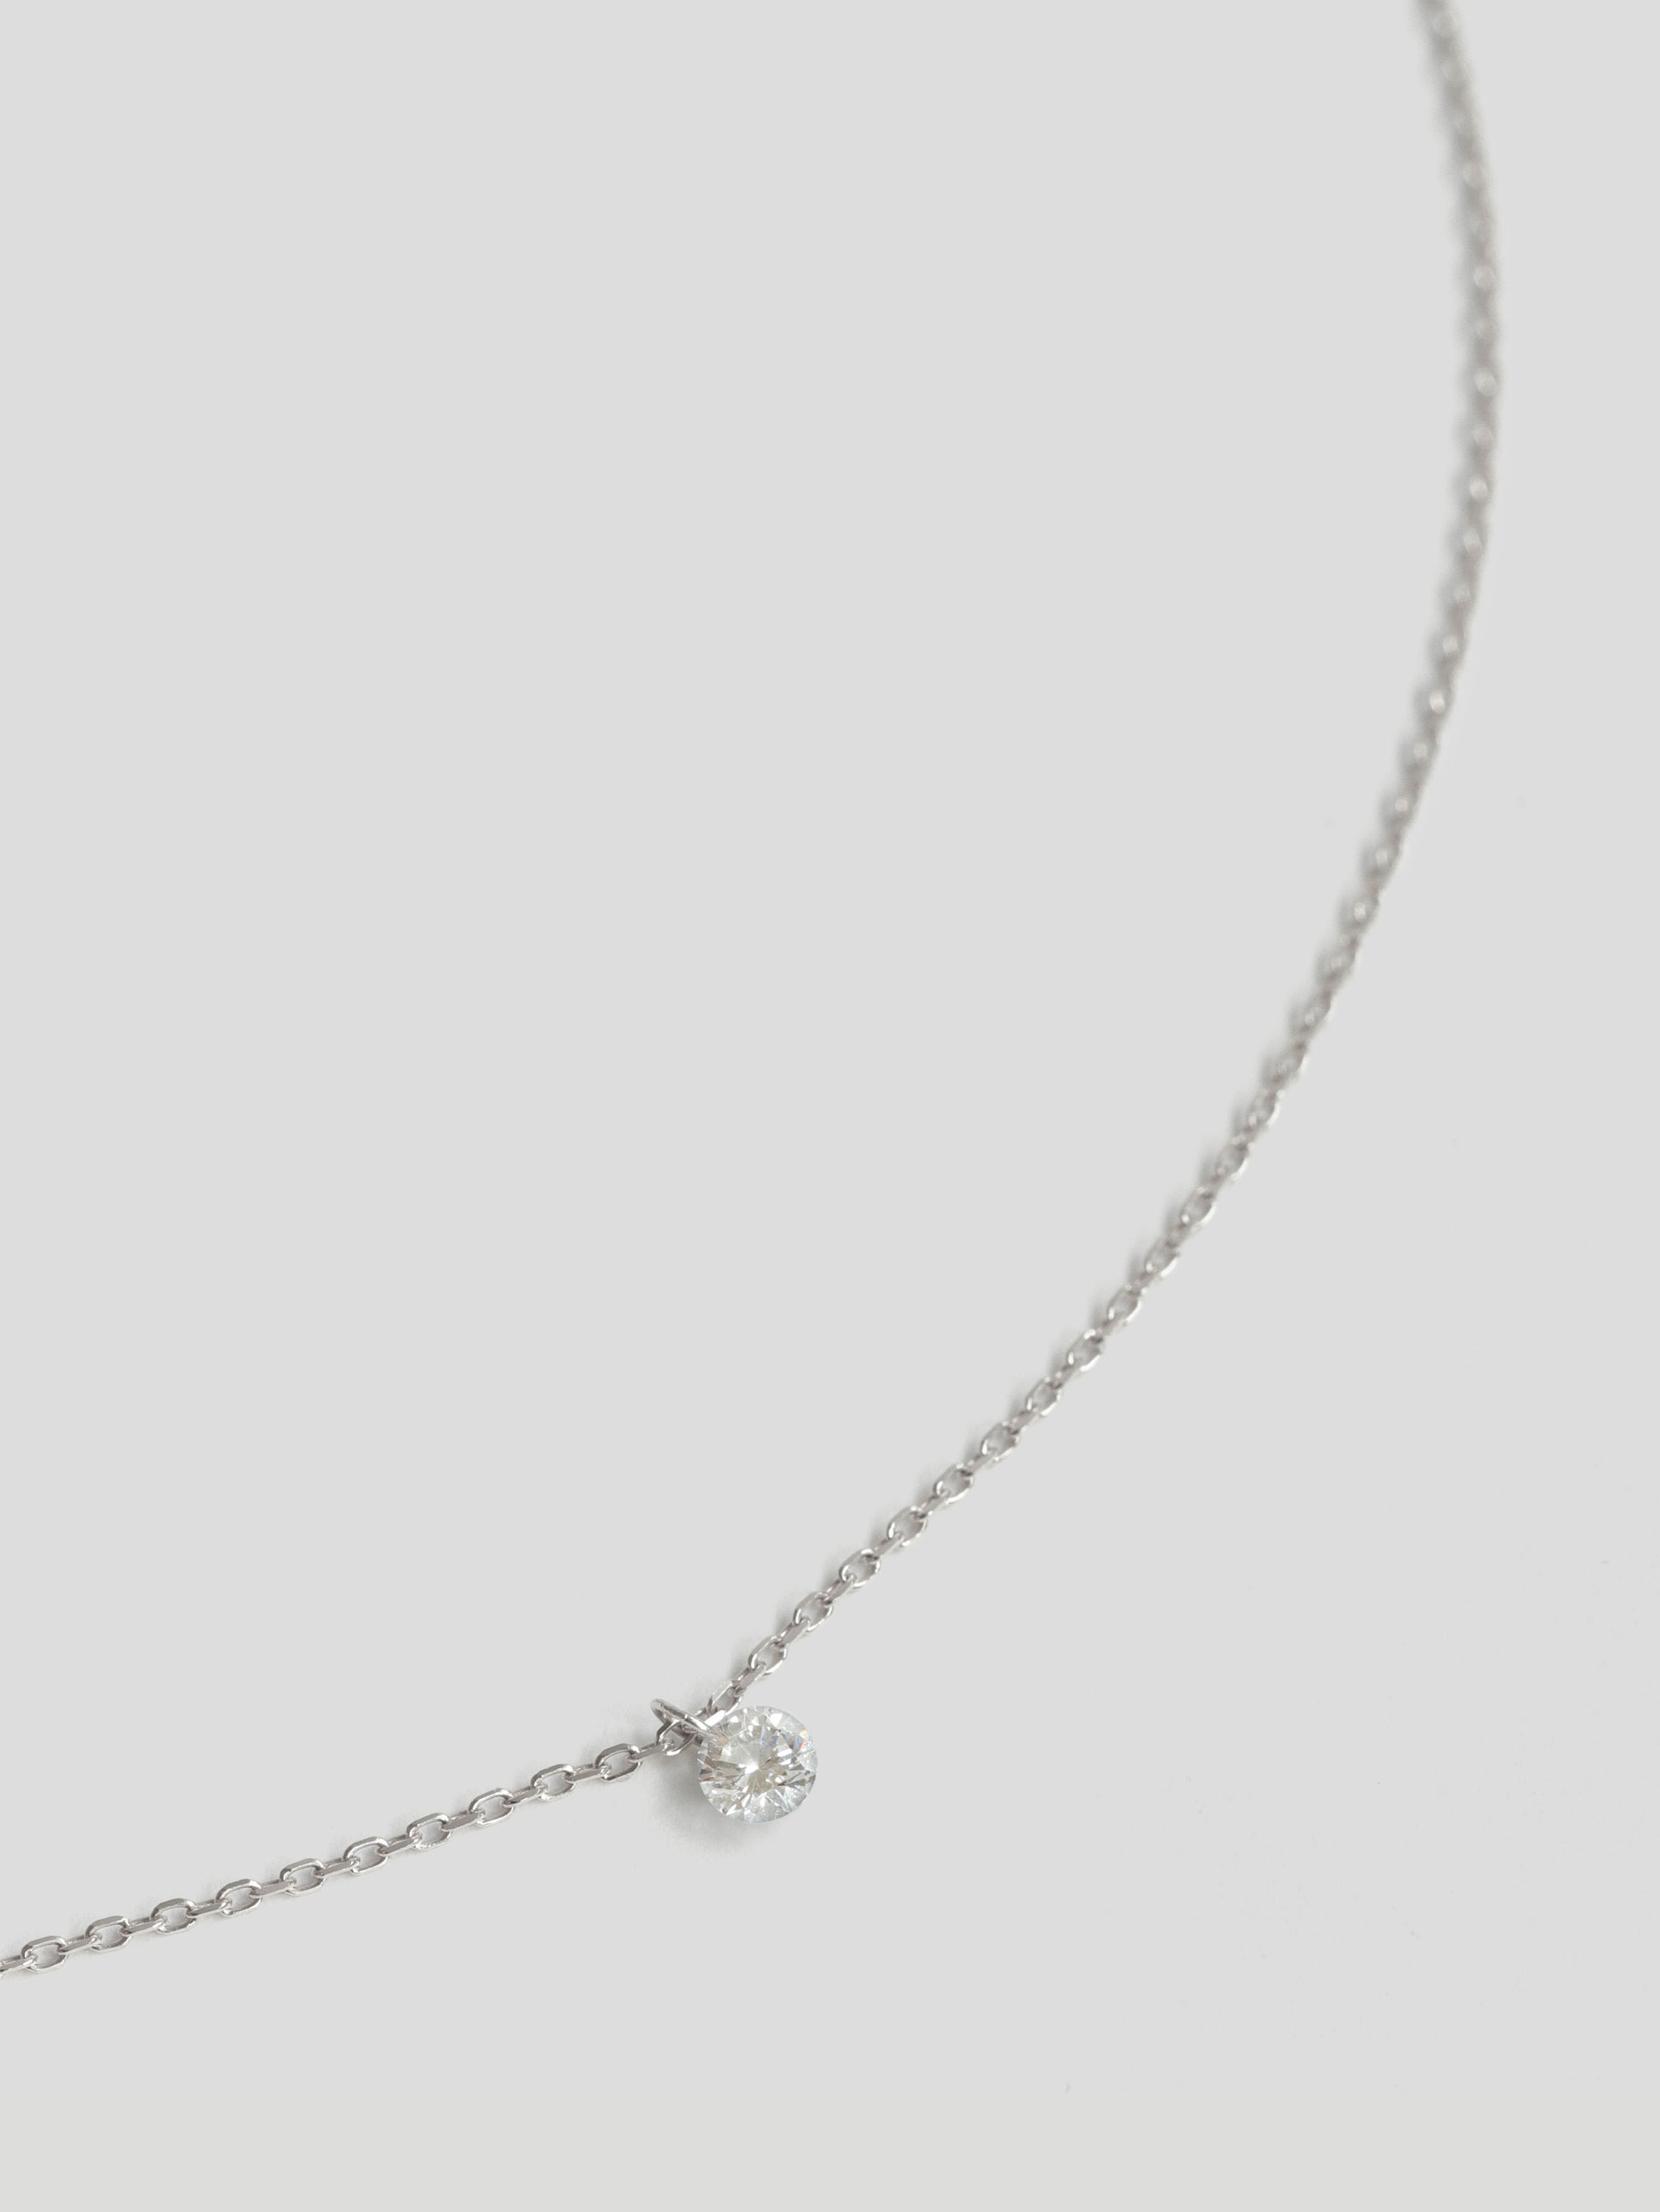 Float Necklace - Diamond in 14k White Gold | Curious Creatures